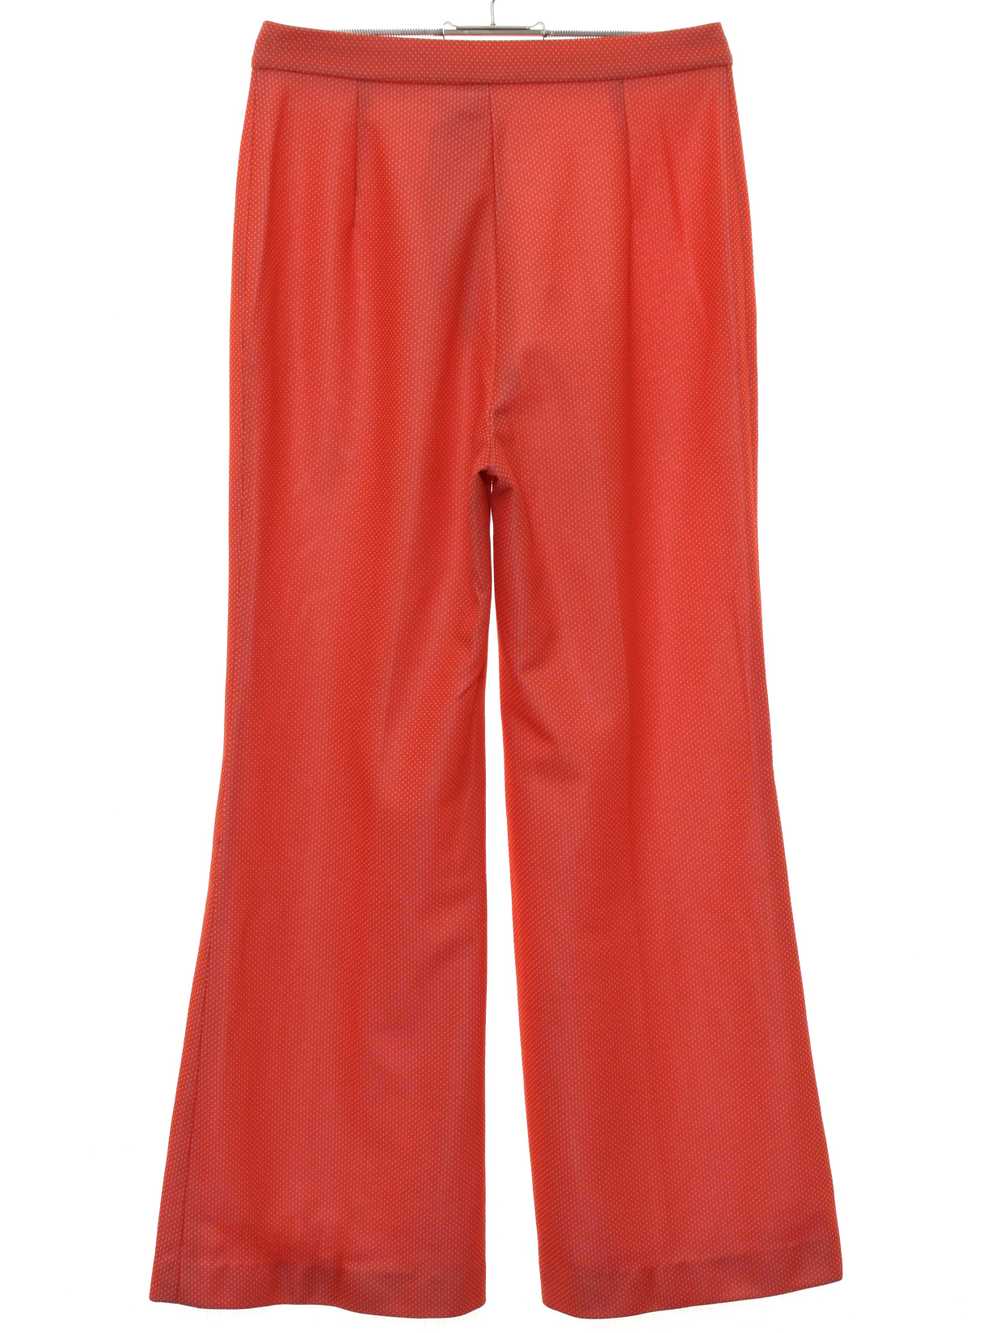 1970's Womens Bellbottom Knit Pants - image 3